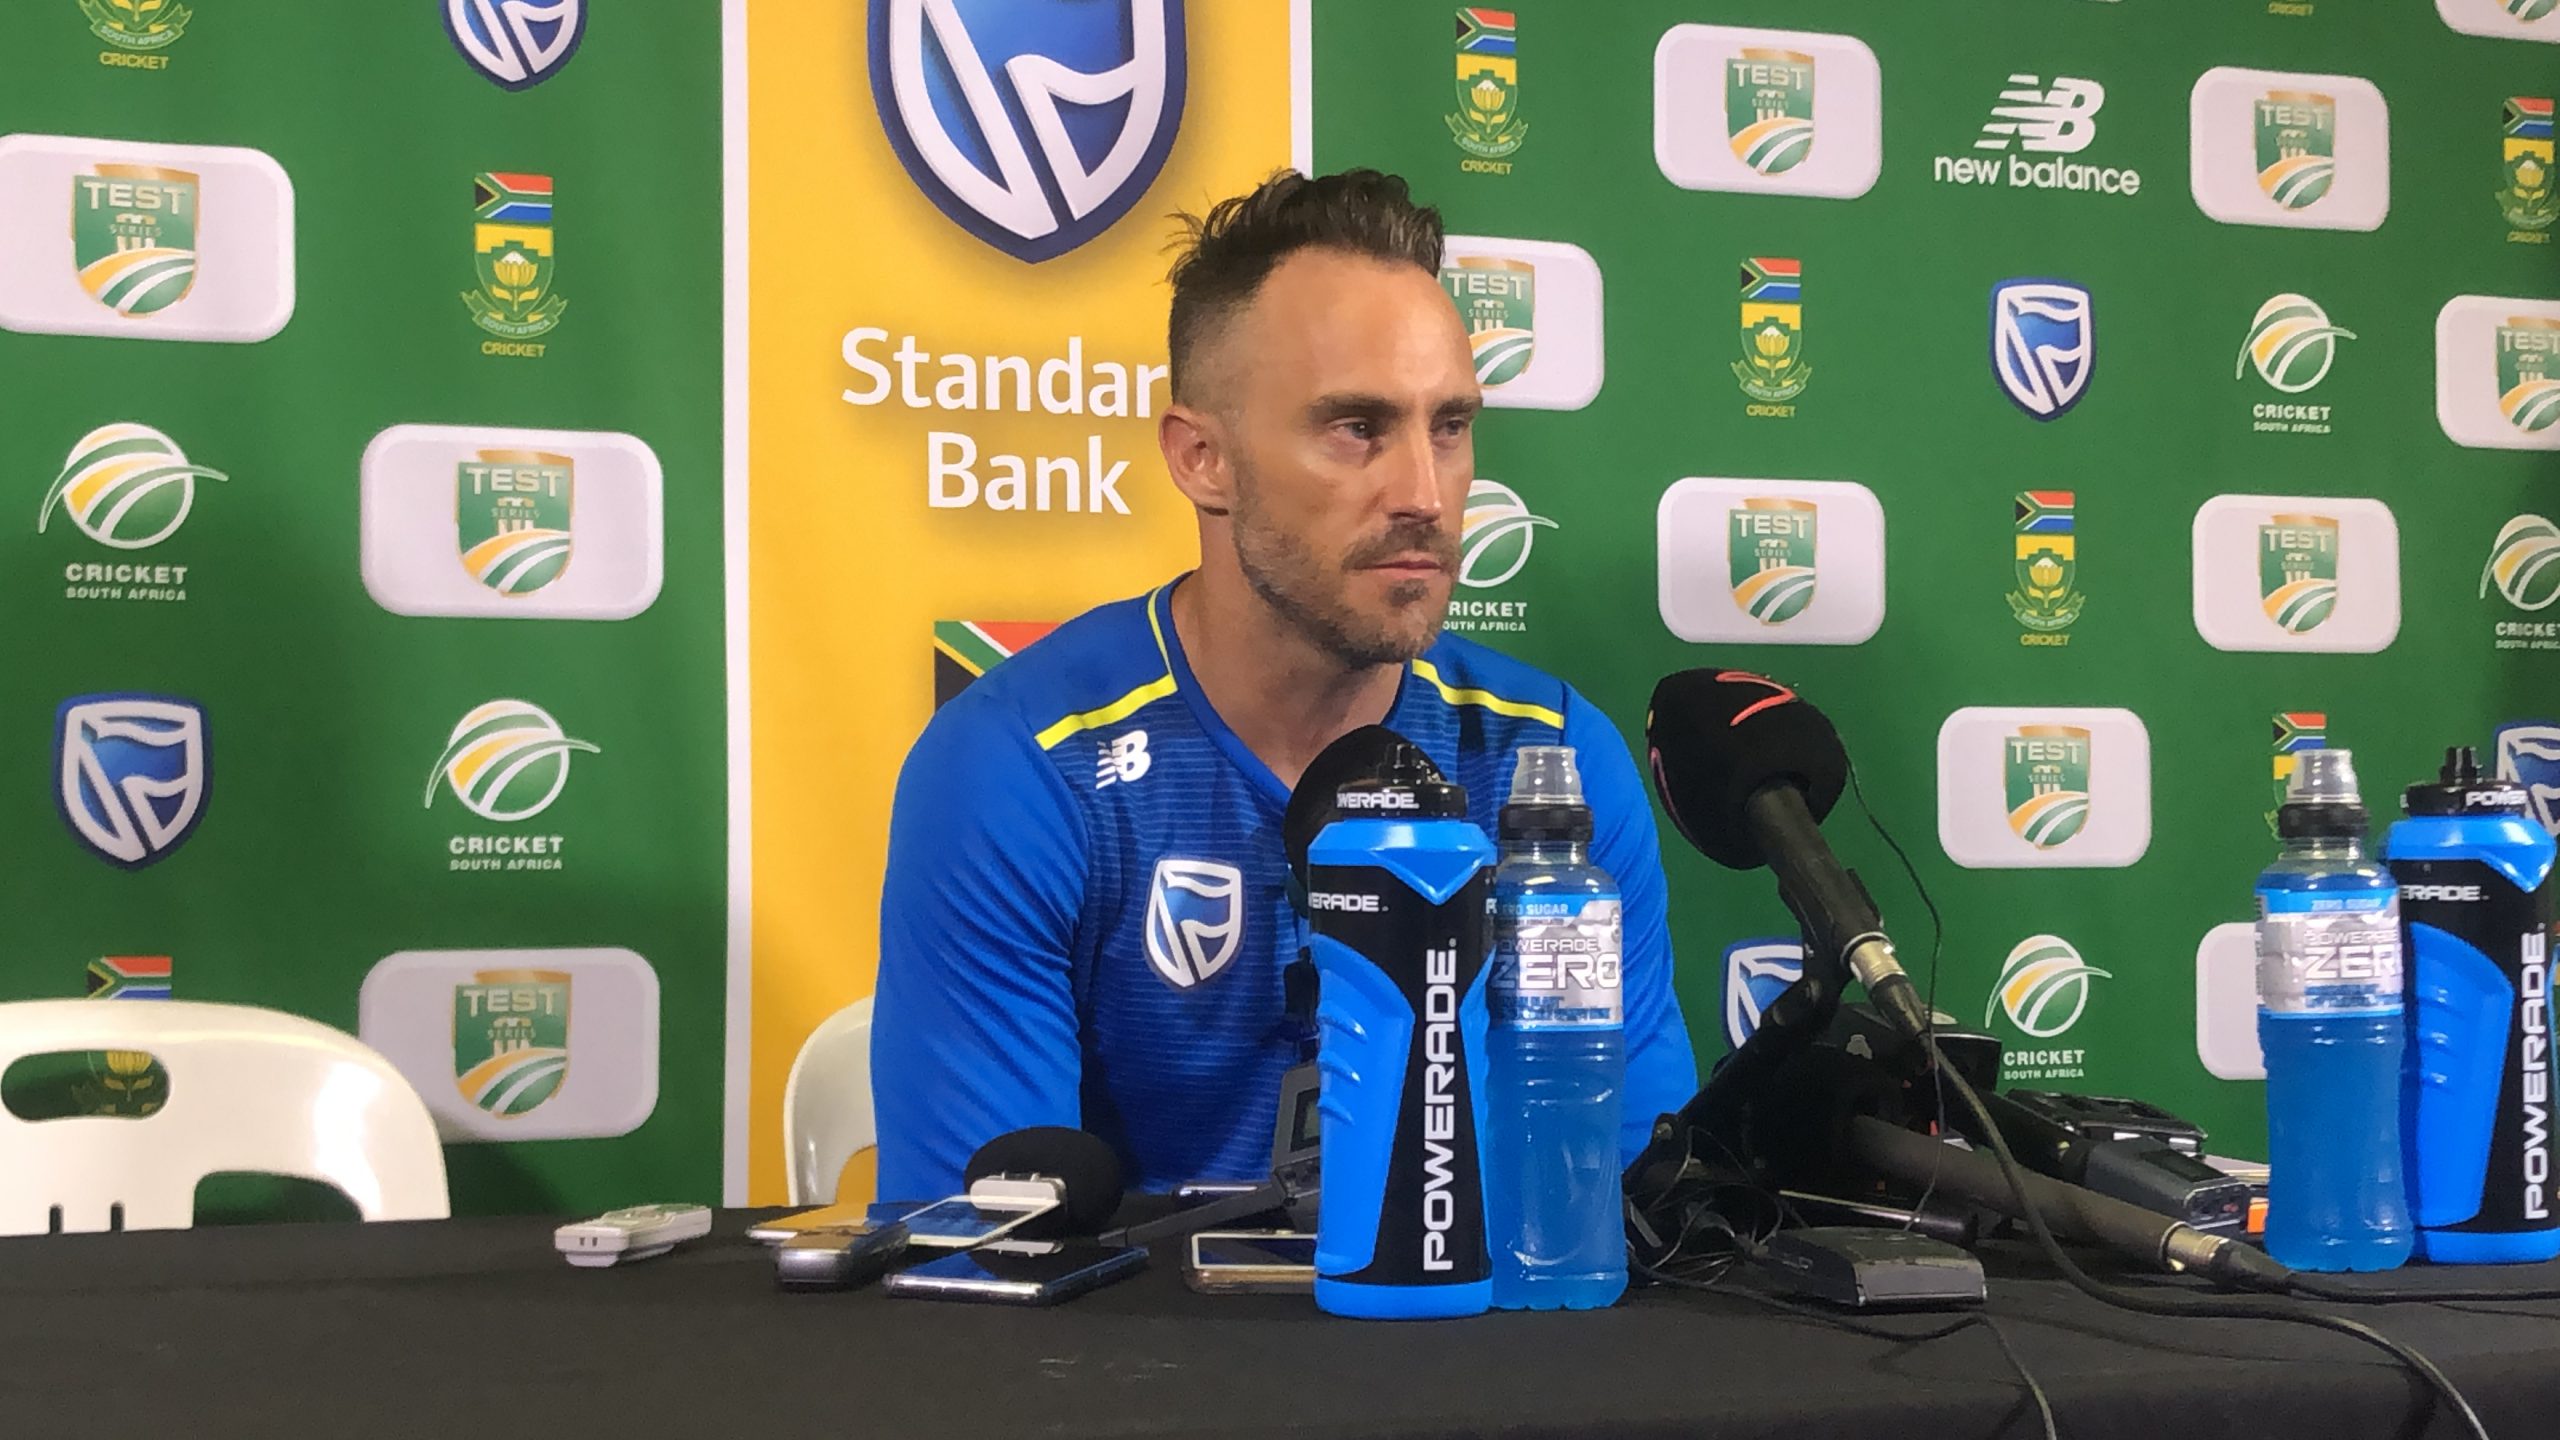 Faf du Plessis: I’m committed to playing for South Africa